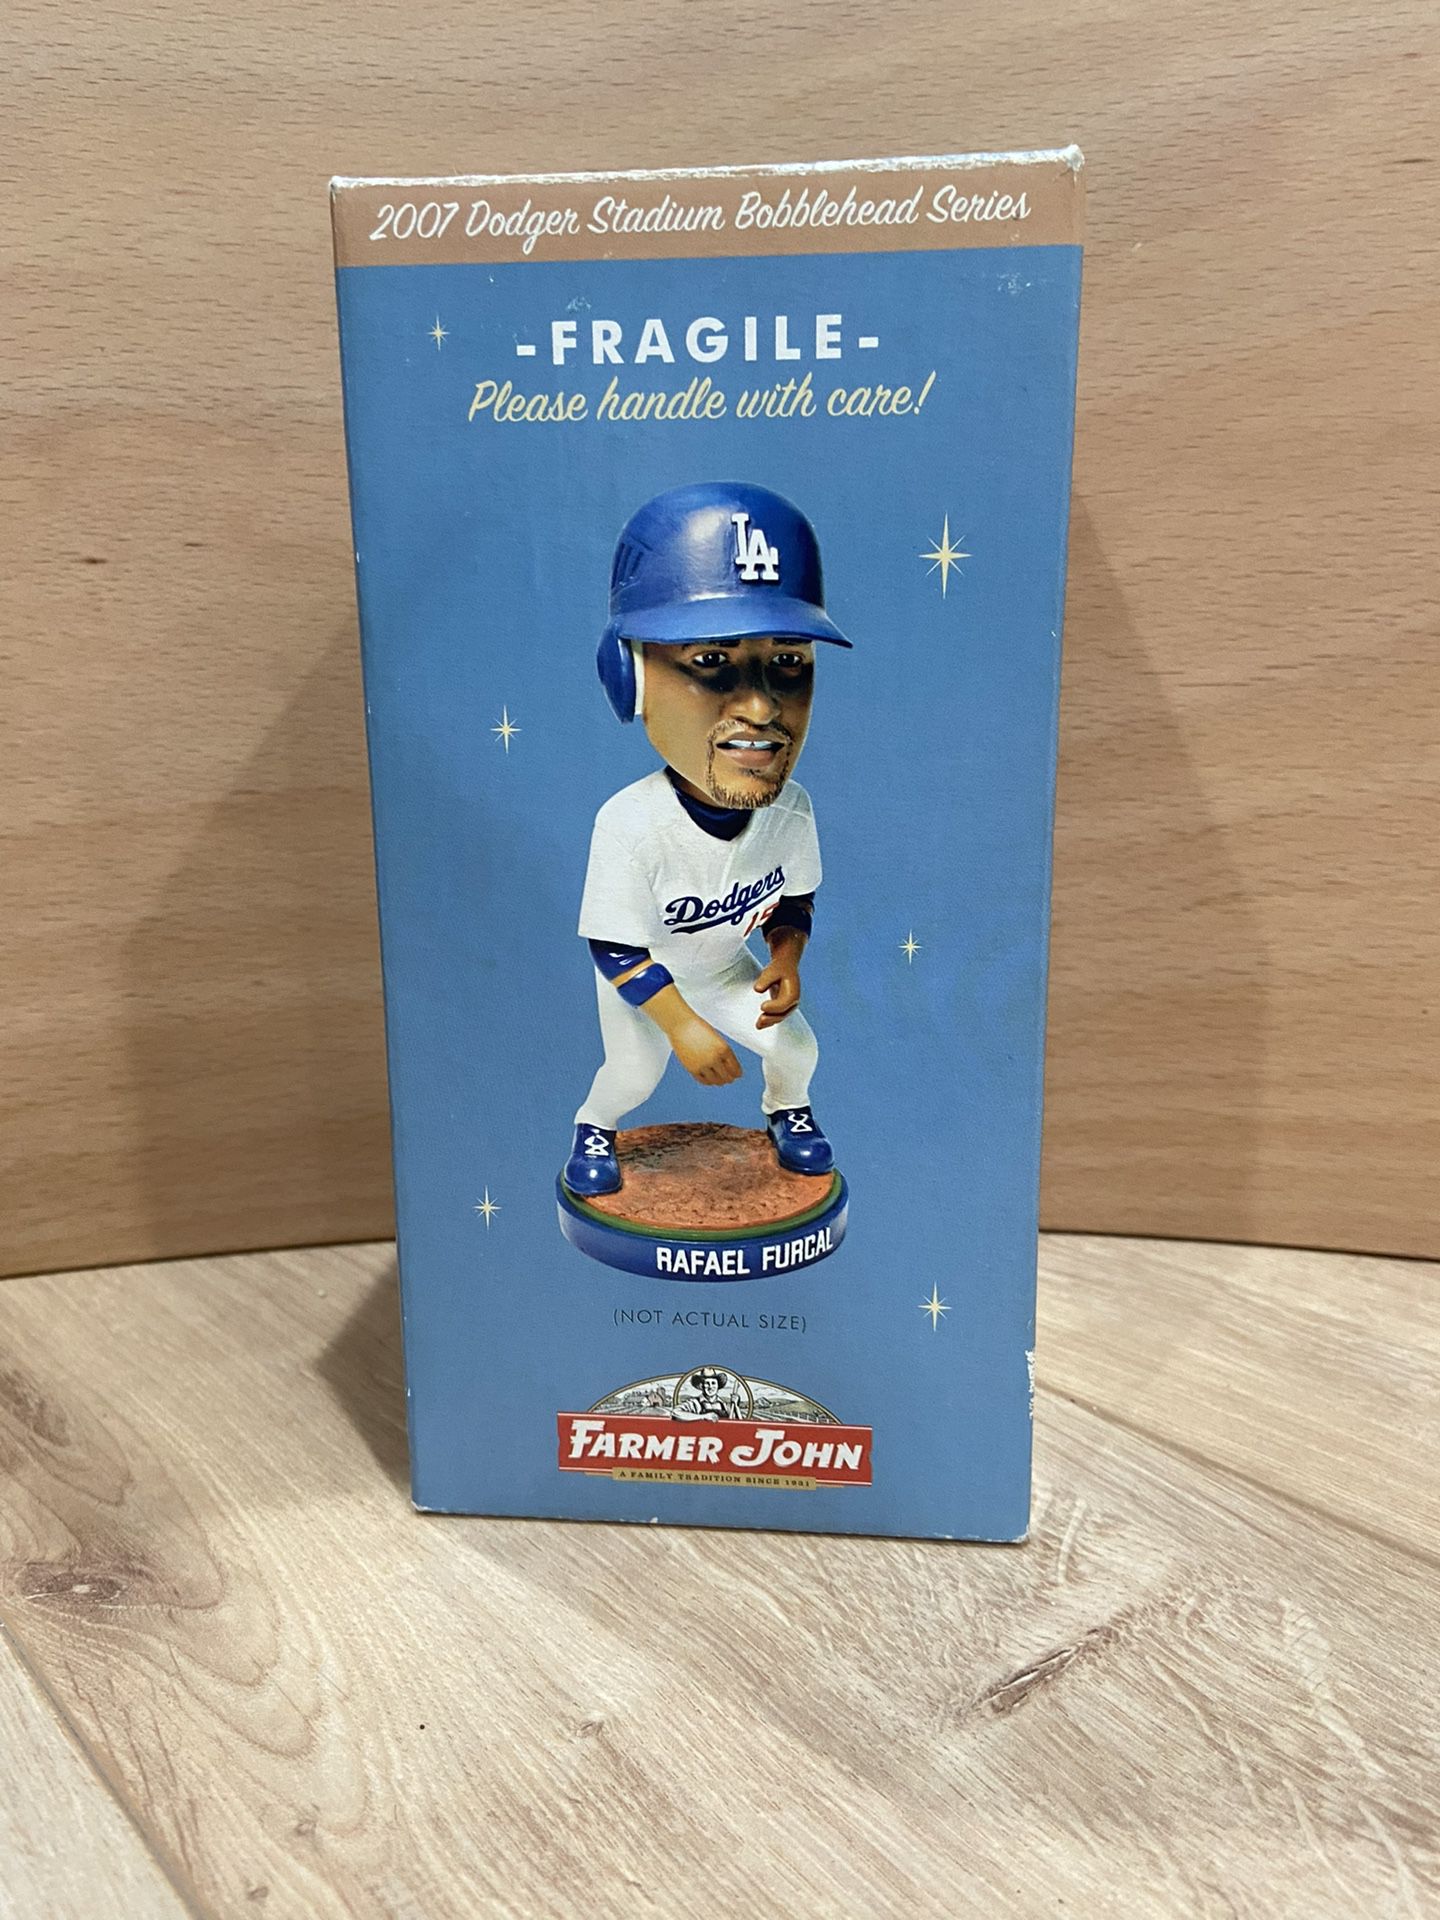 2007 Rafael Furcal Dodgers Bobblehead for Sale in Agoura Hills, CA - OfferUp